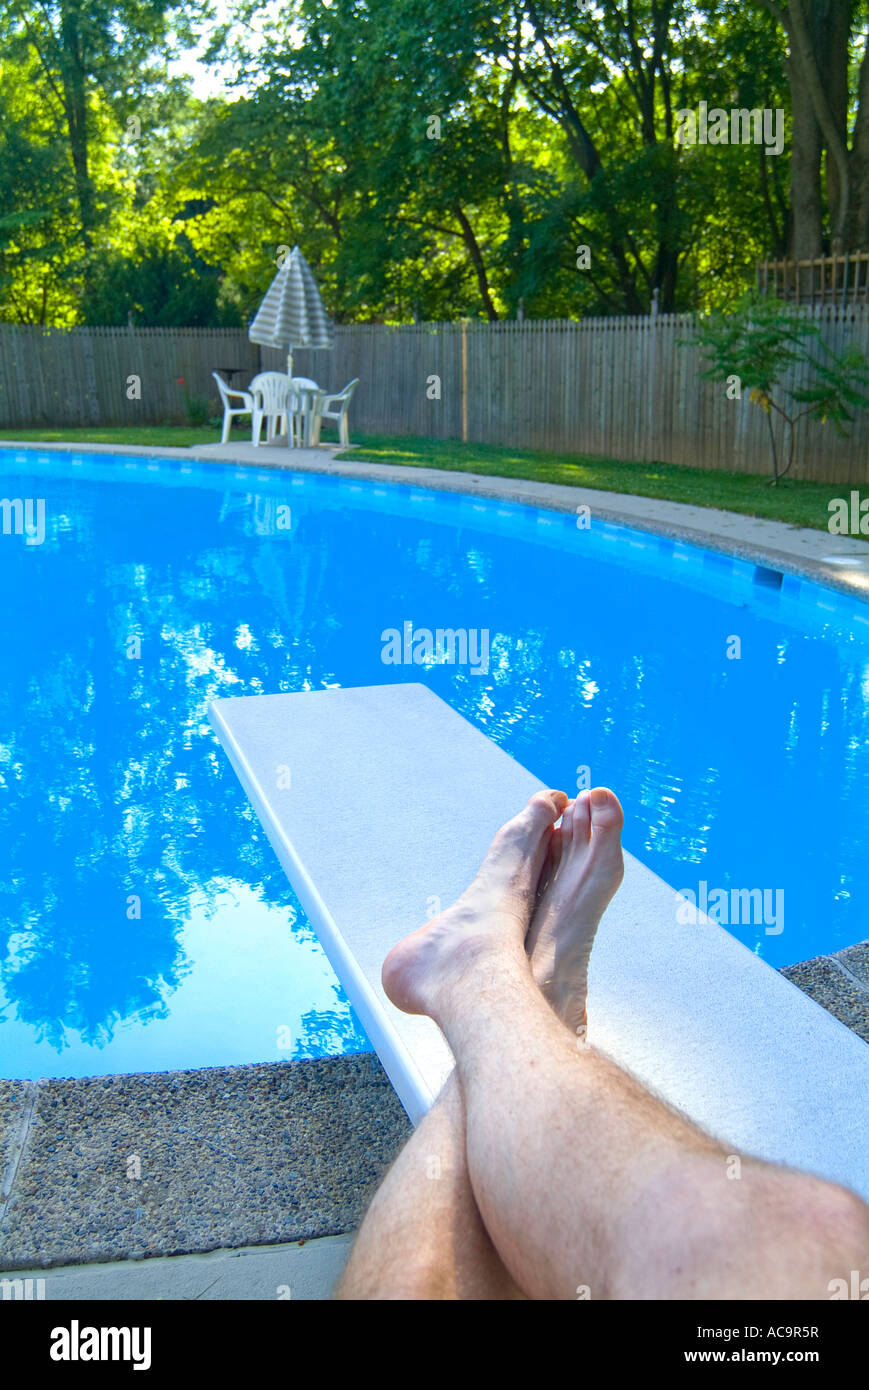 Swimming Pool With Mans Tan Legs On Diving Board Relaxing On A Summer Vacation Day Stock Photo